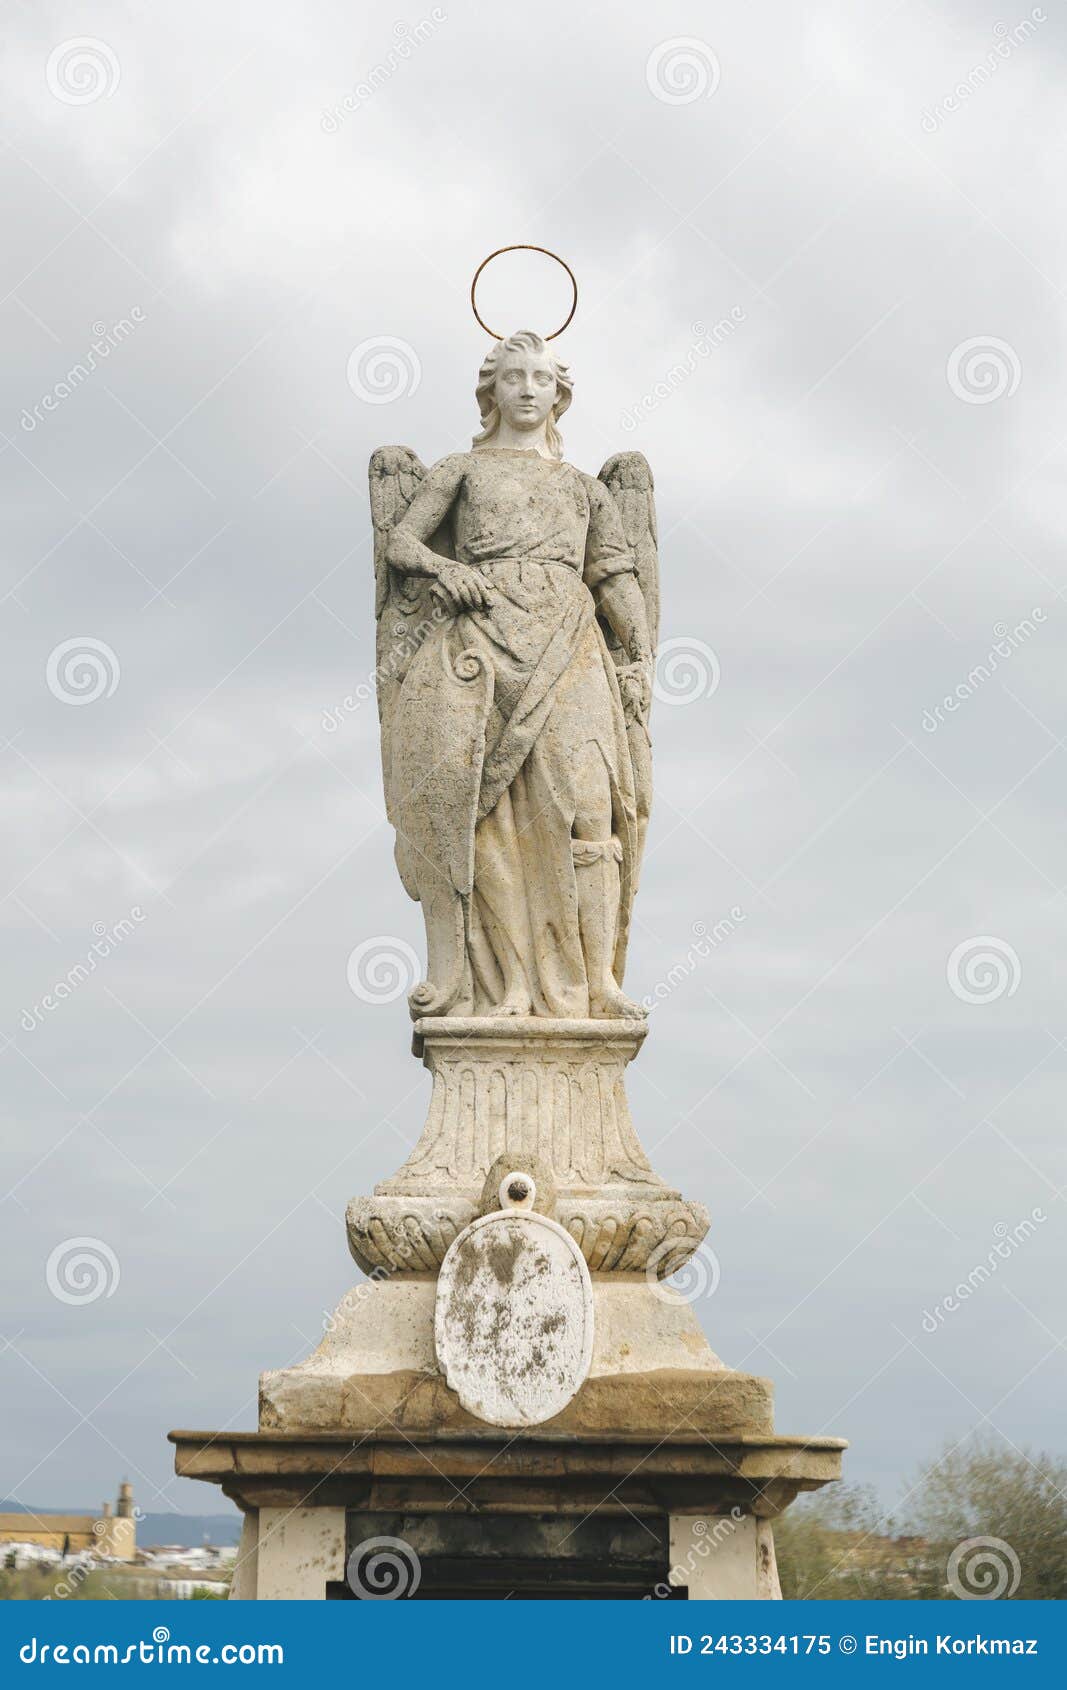 statue of saint raphael in the middle of the roman bridge in cordoba, spain